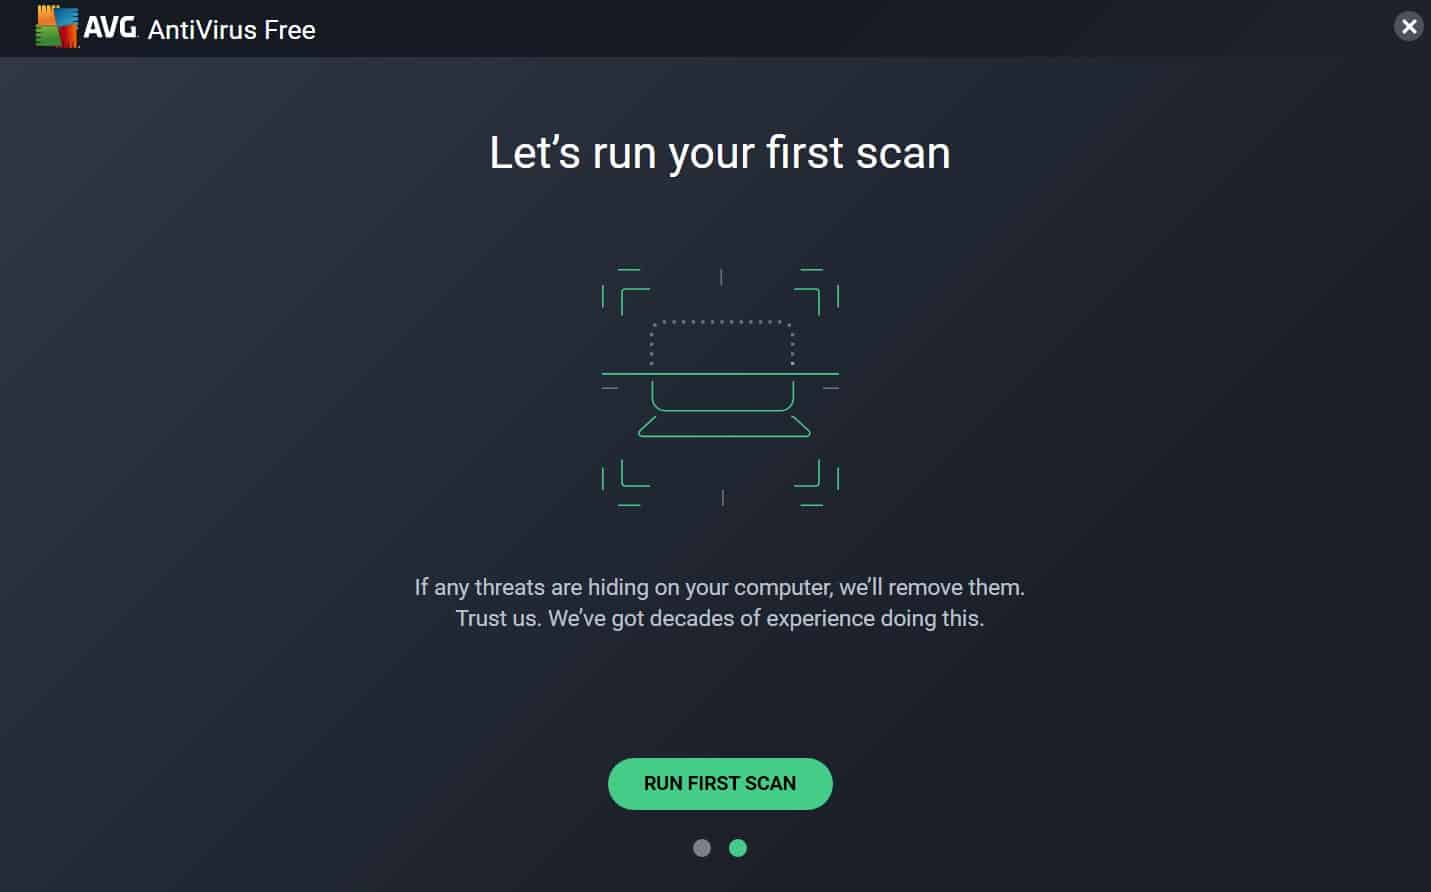 Run a full system scan using an antivirus program
If any malware or viruses are detected, follow the recommended steps to remove them